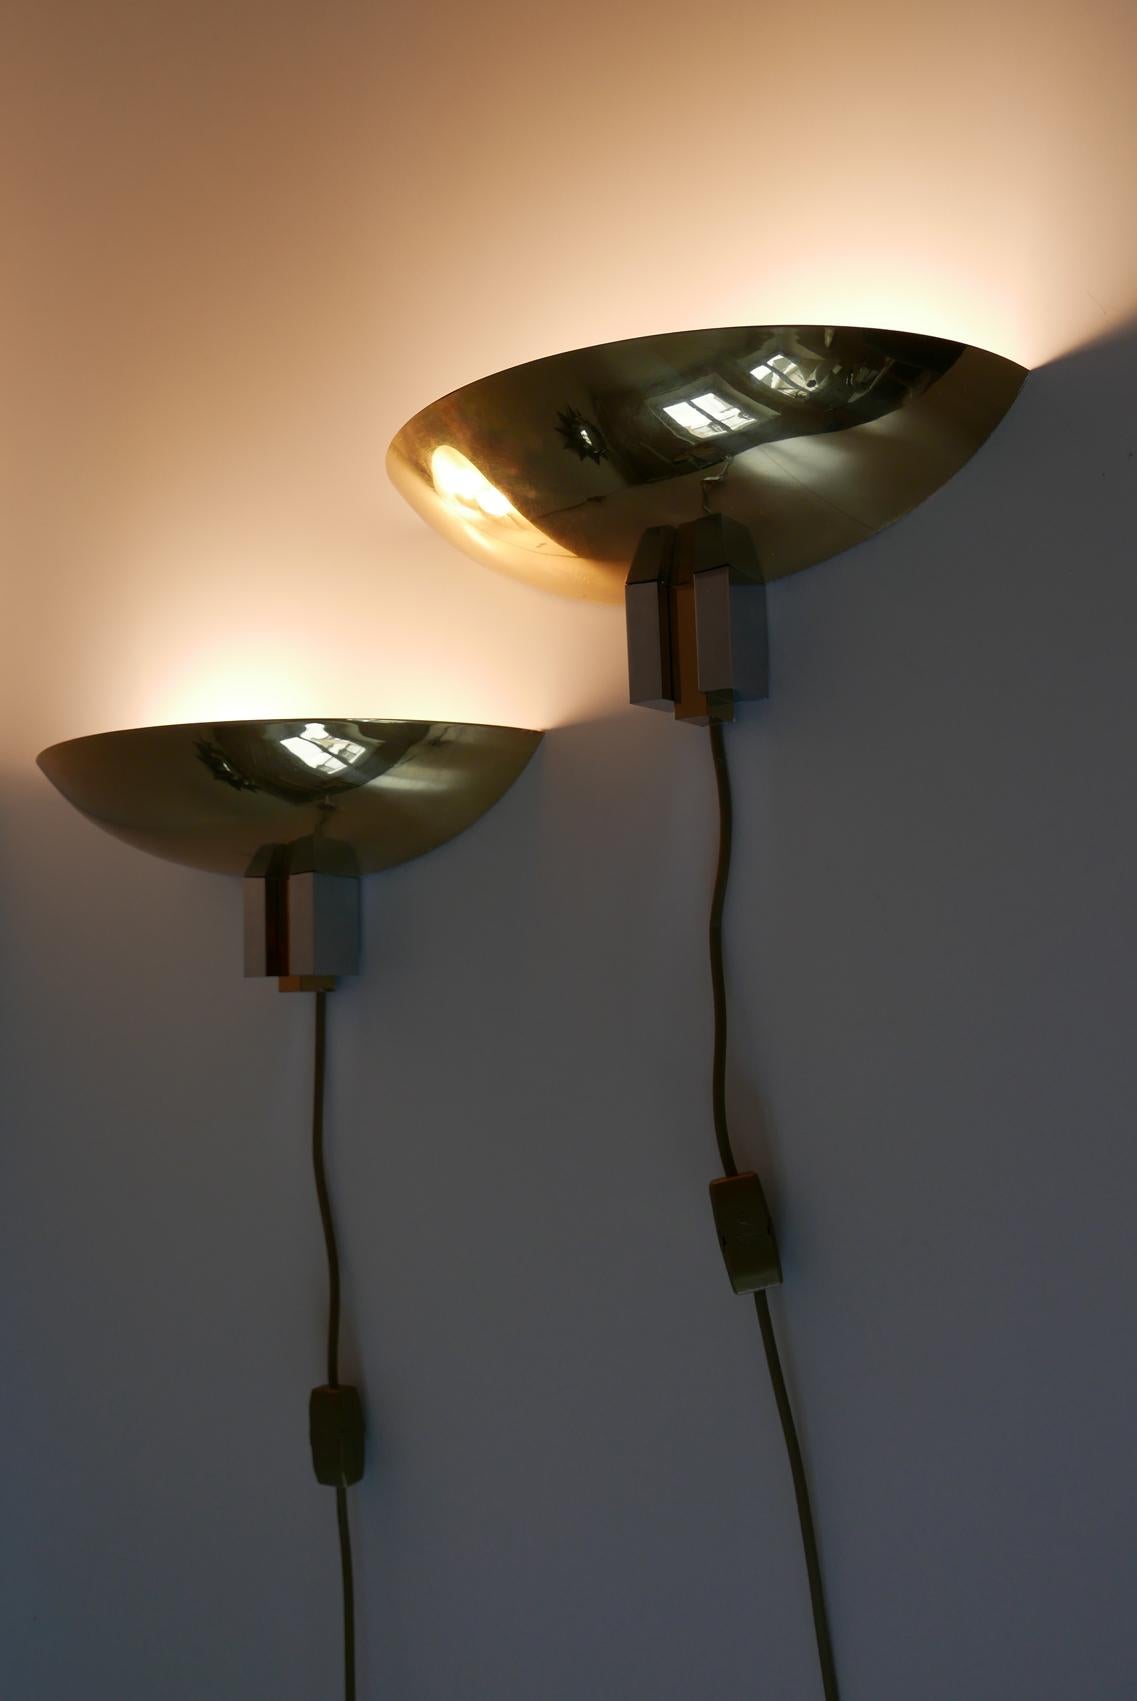 Set of Two Midcentury Brass Wall Lamps or Sconces by Art-Line, 1980s, Germany For Sale 1